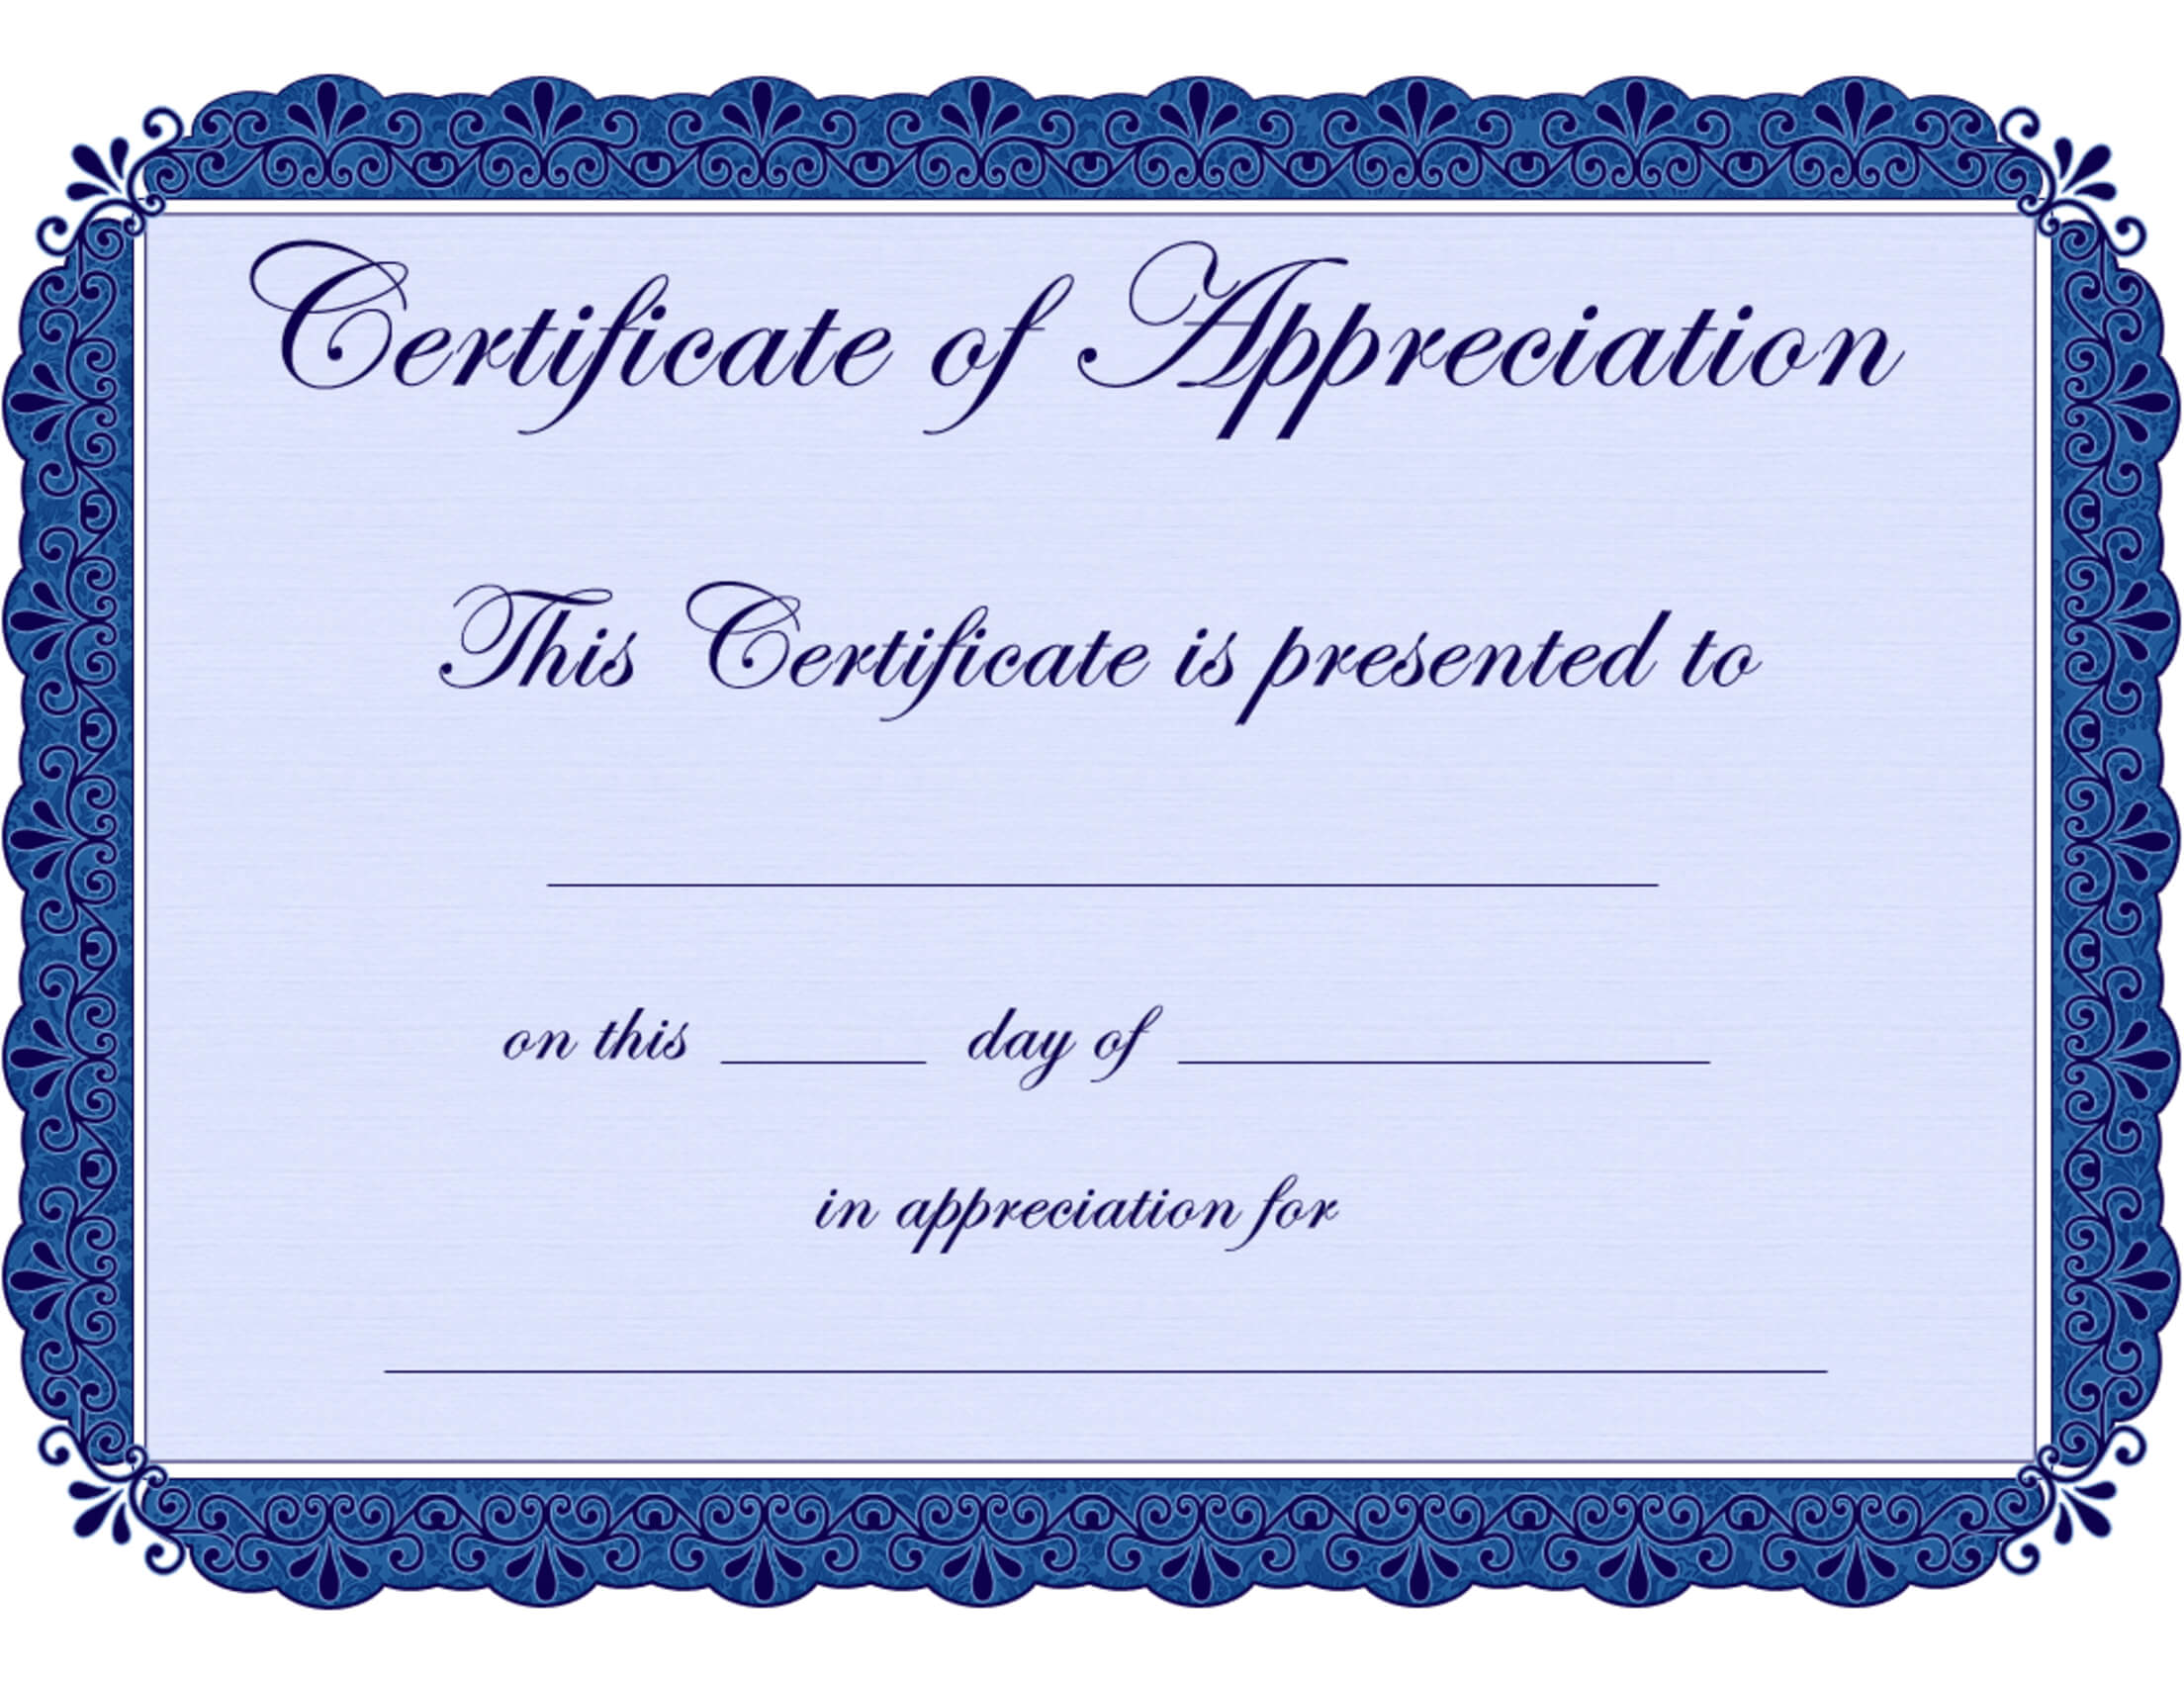 Free Printable Certificates Certificate Of Appreciation Inside Free Certificate Templates For Word 2007